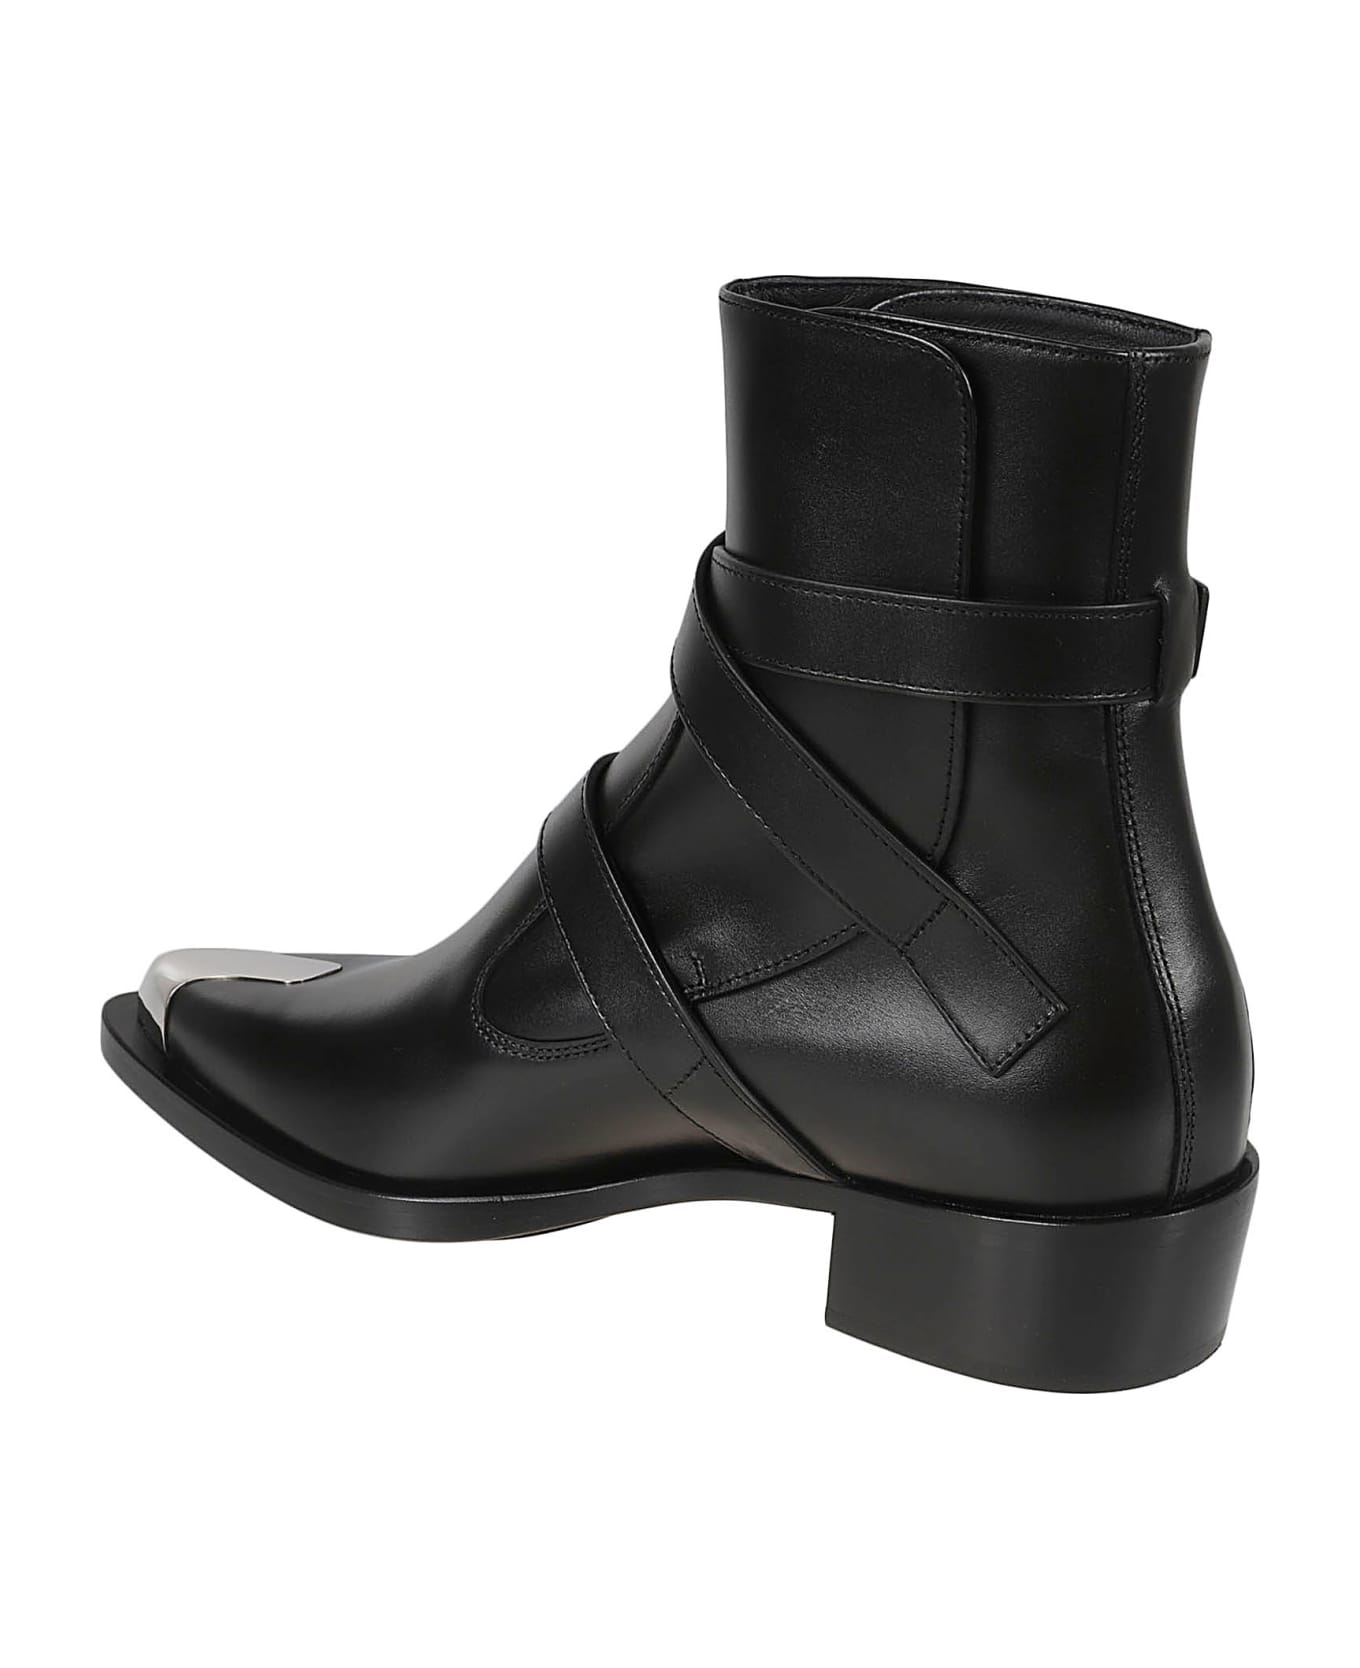 Alexander McQueen Buckled Strappy Ankle Boots